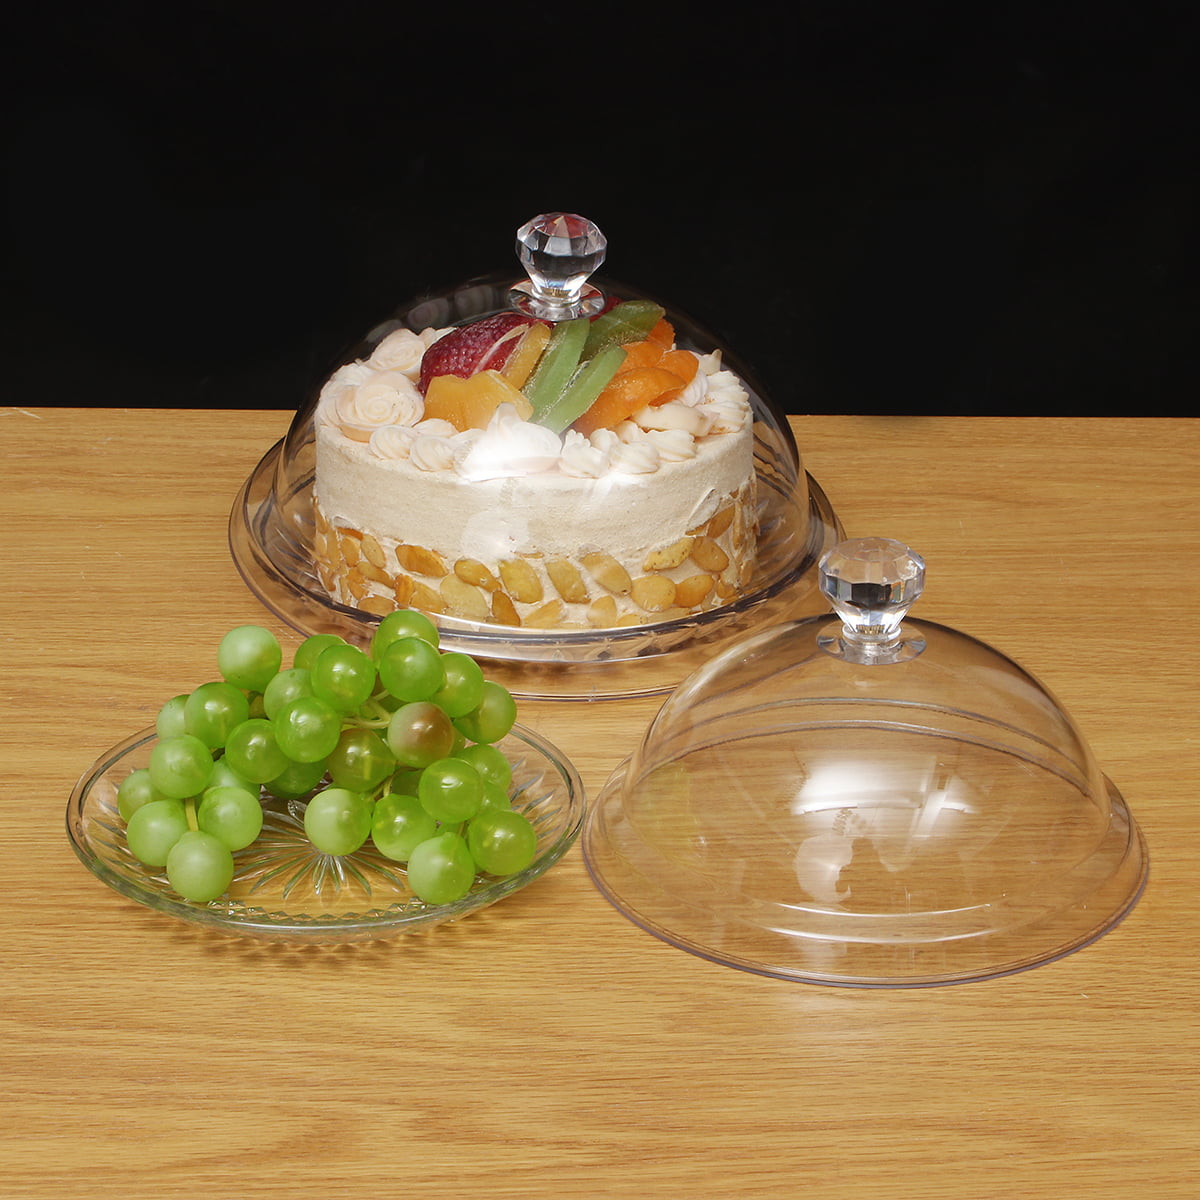 Clear Acrylic Cupcake Cake Stand Dessert Display Holder Plate w/ Dome Lid Cover